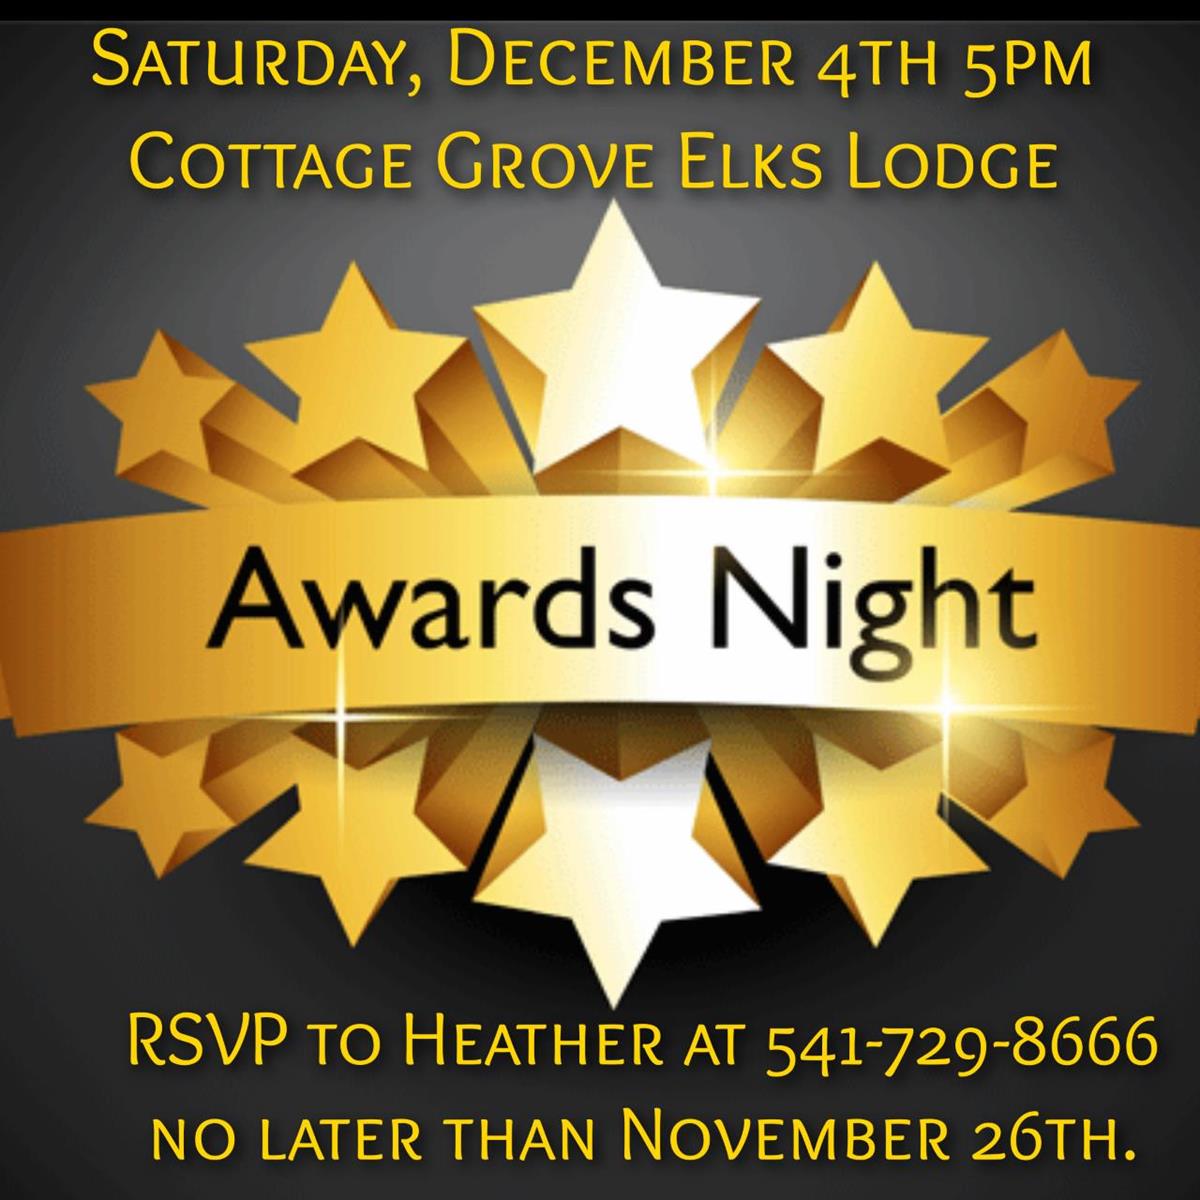 2021 AWARDS BANQUET SATURDAY, DECEMBER 4TH, CLICK THE LINK FOR ALL THE INFO!